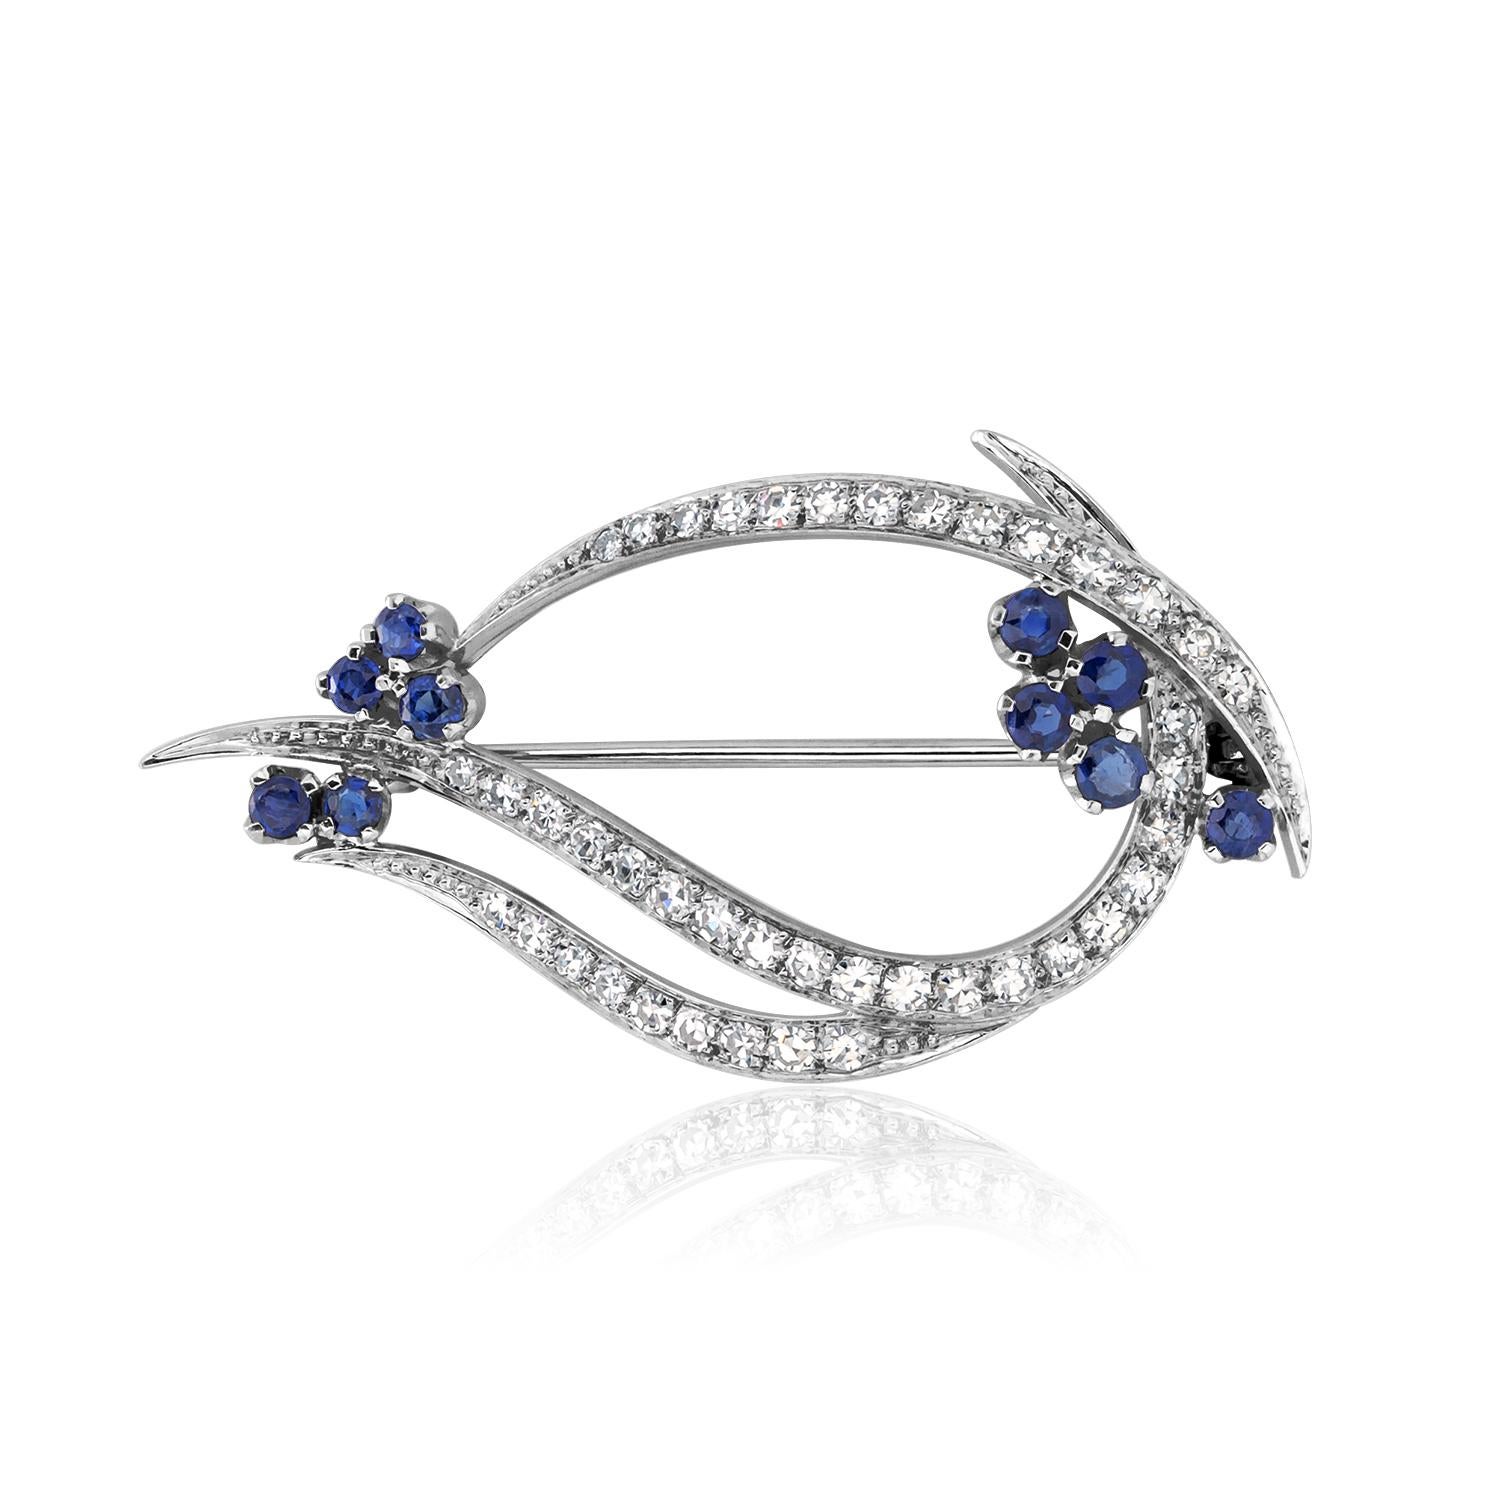 Women's or Men's Platinum 1.75 Inch Flower Cluster Spray Brooch Diamond Leaves and Sapphires  For Sale